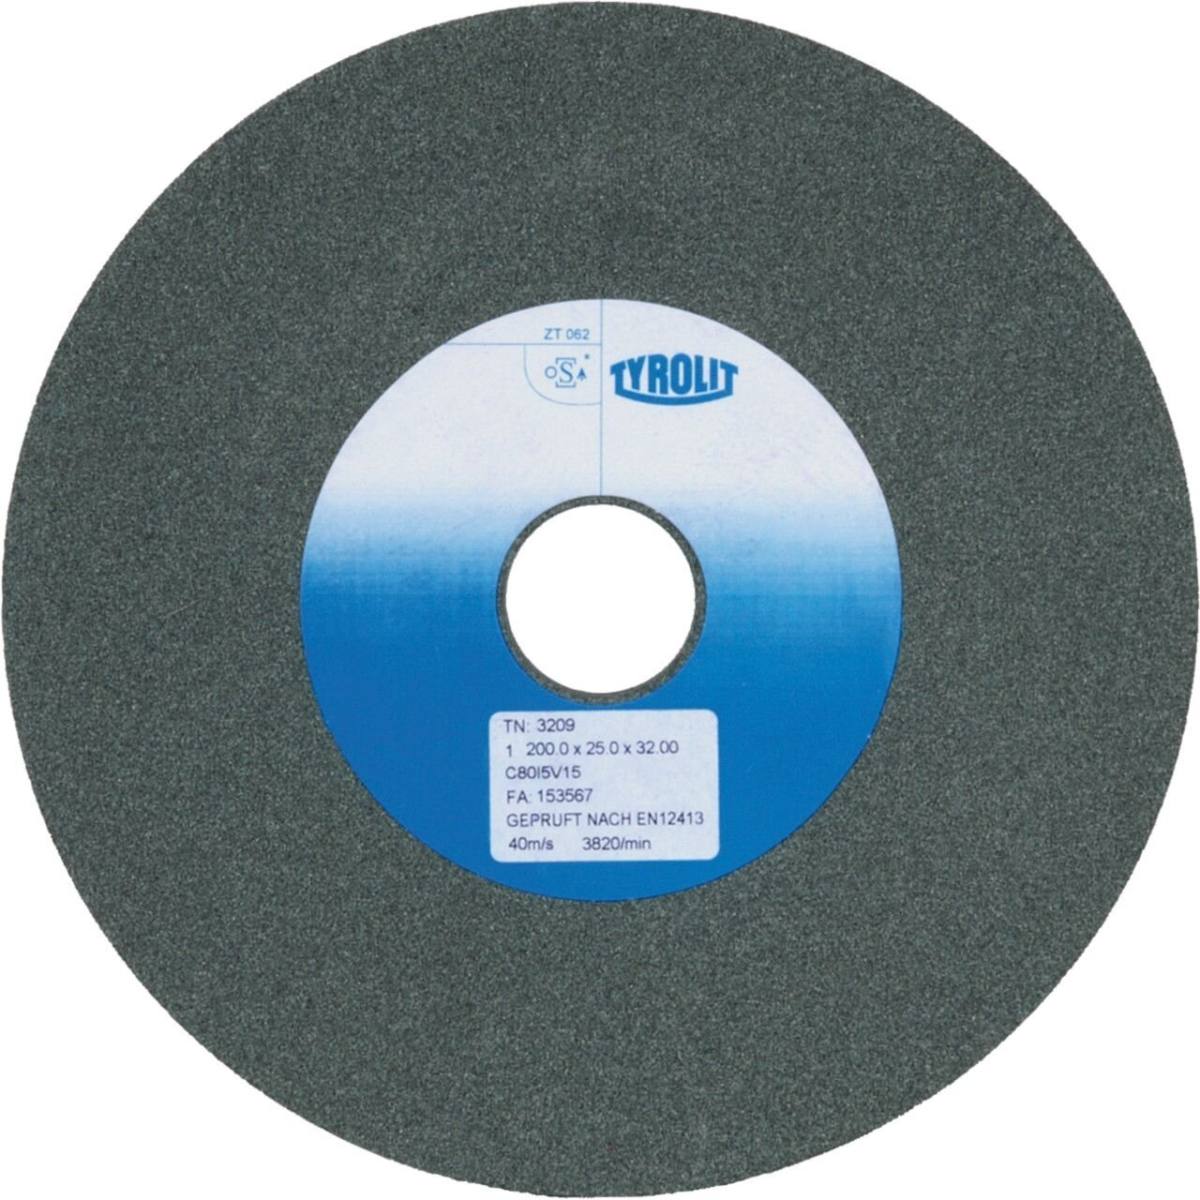 Tyrolit Rotary dressing DxDxH 200x12x76.2 Dressing discs for diamond and CBN grinding wheels, shape: 1, Art. 786852